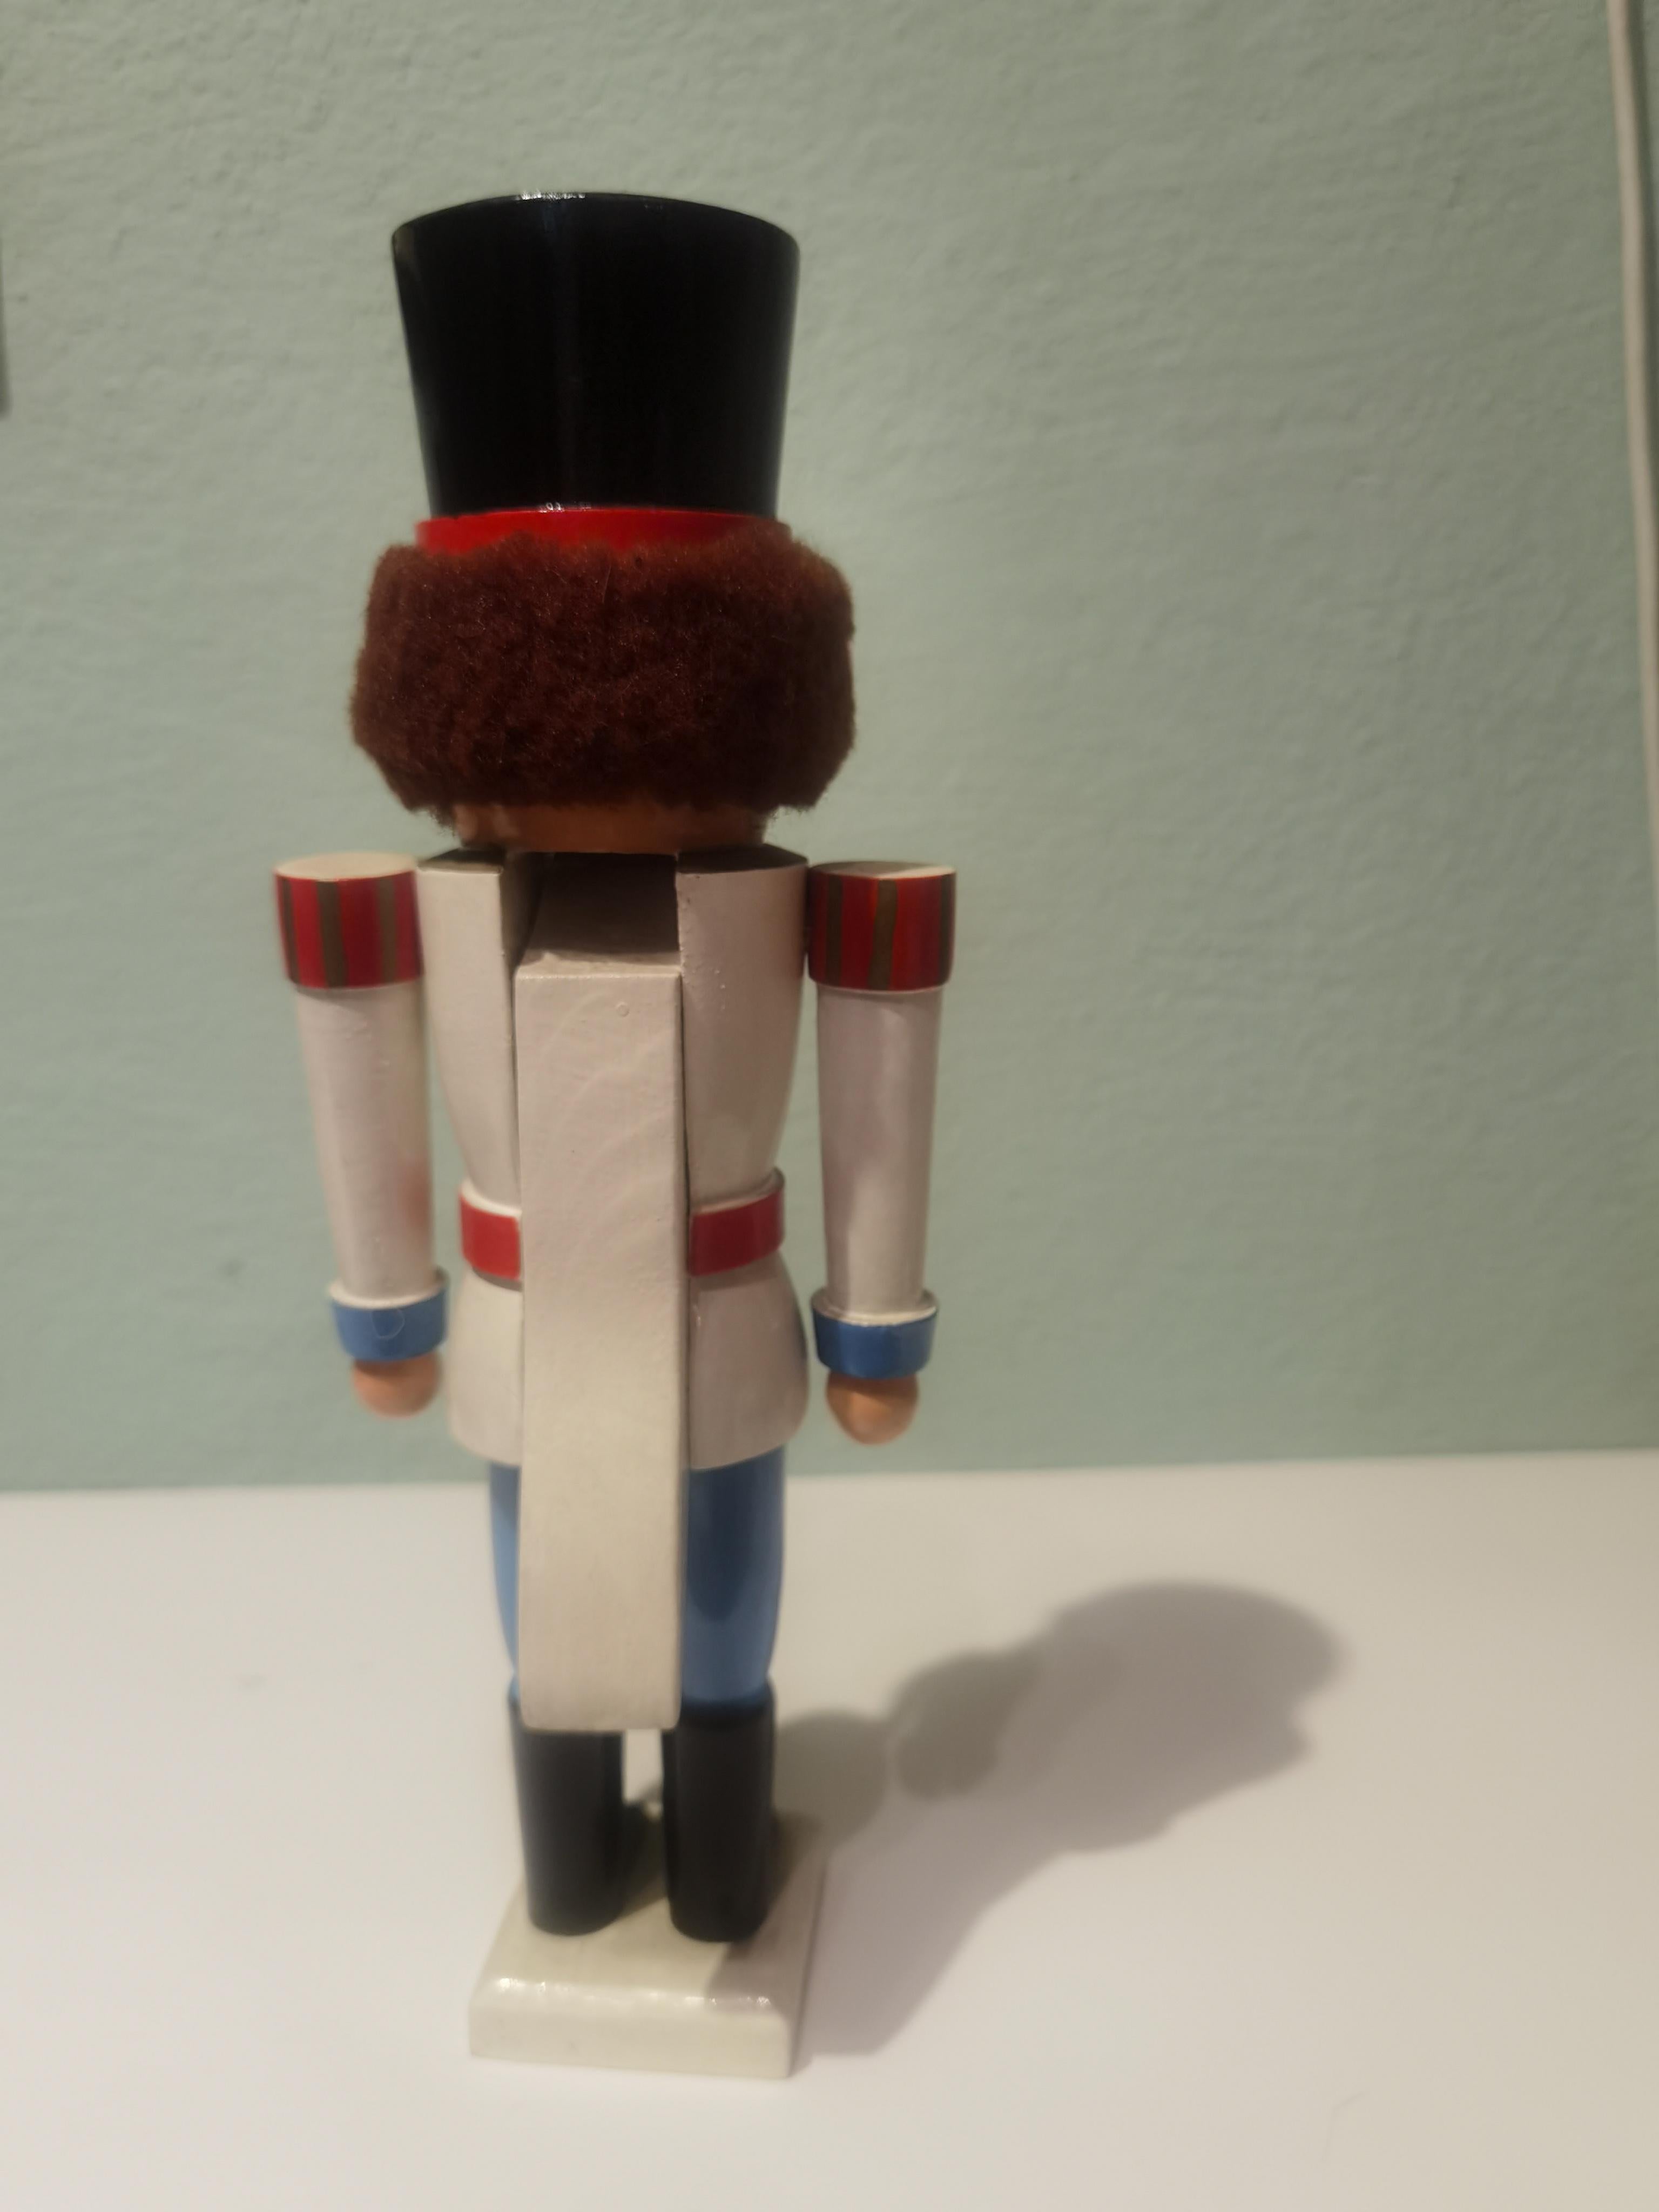 Vintage wooden nutcracker figure from the Erzgebirge. The region Erzgebirge formerly Eastern Germany is famous for this special kind of nutcrackers, where intricate carving has been their home. Completely hand-painted in blue and white colors and